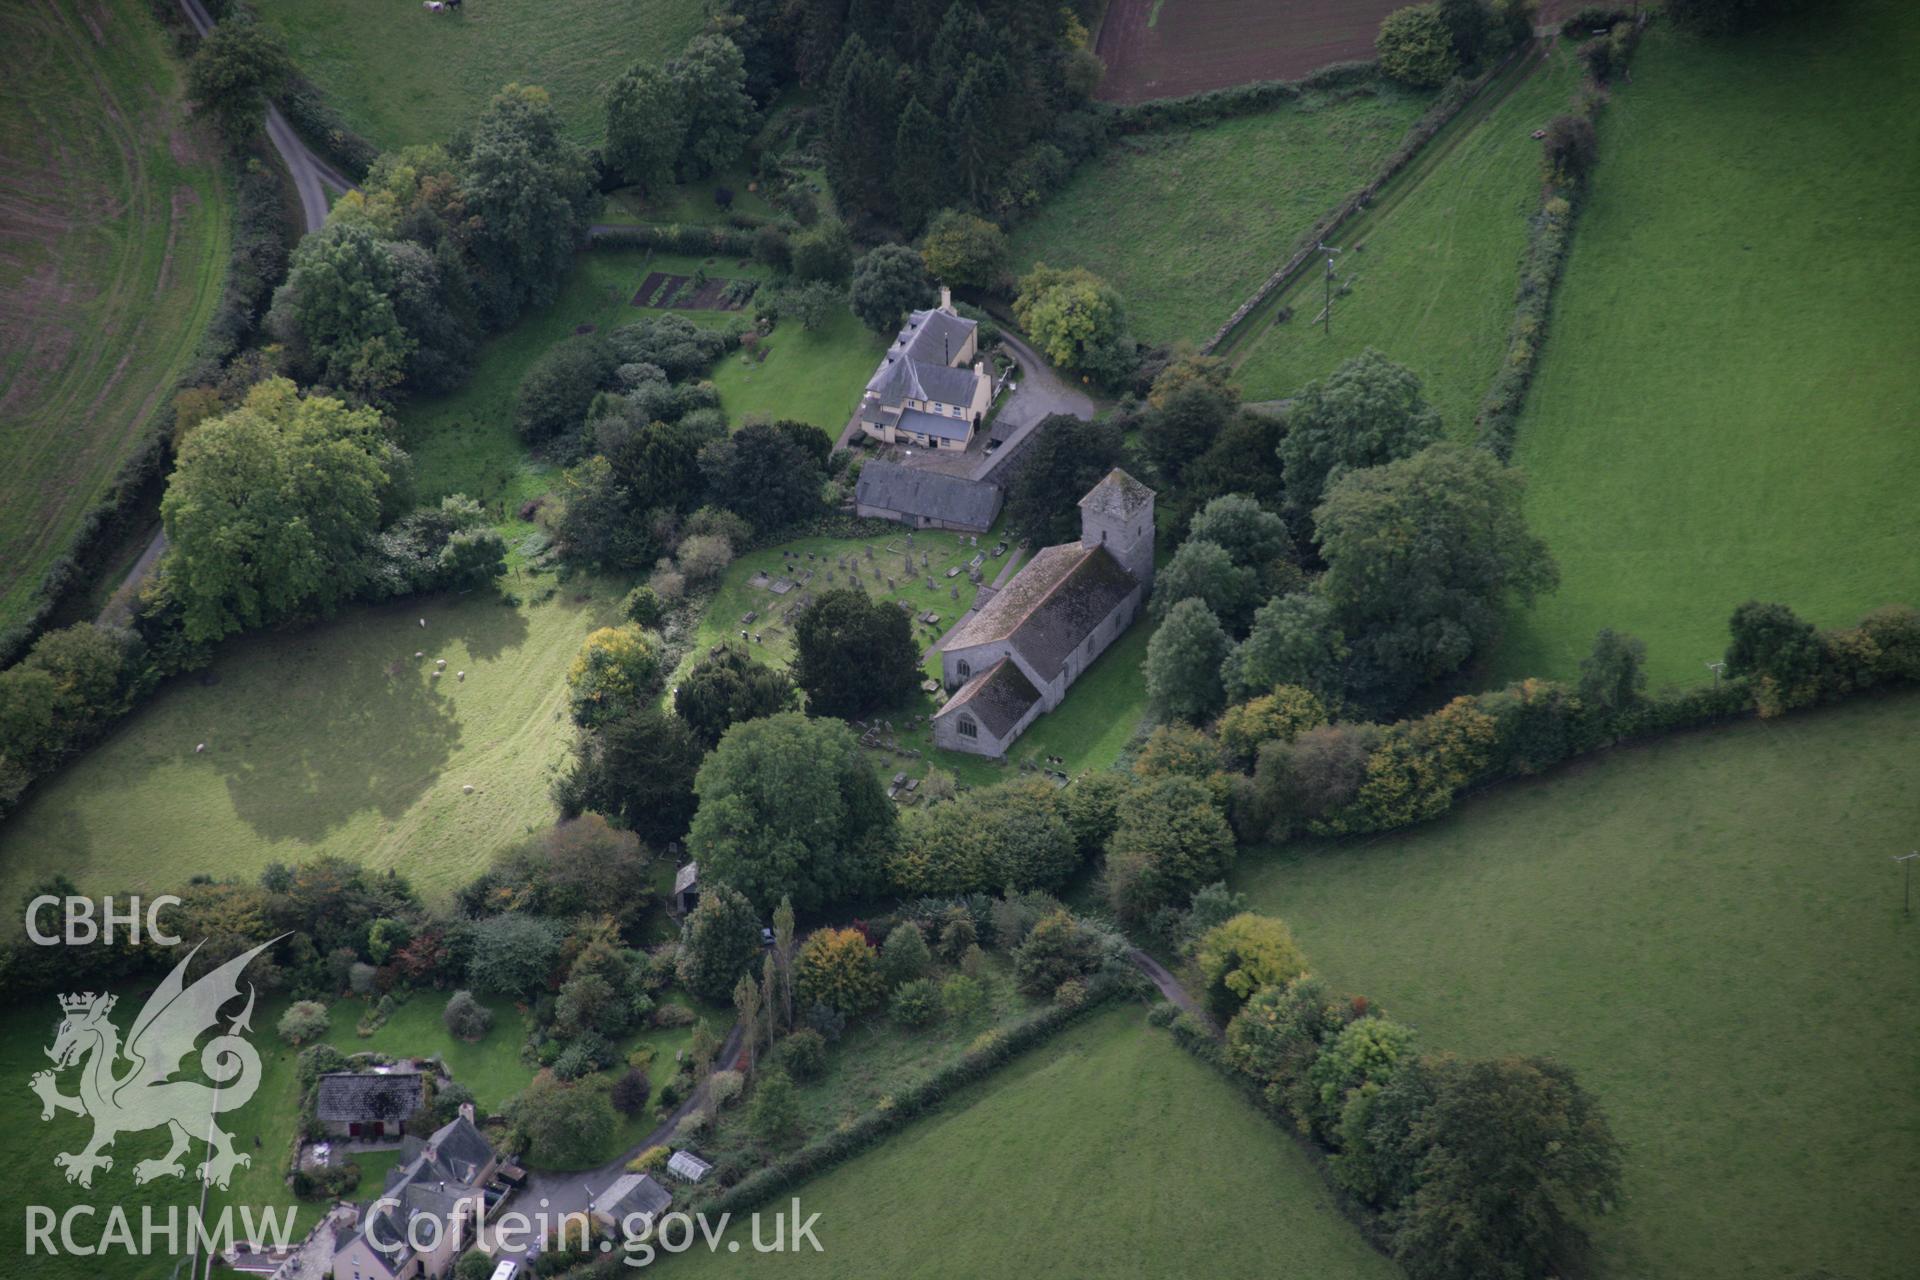 RCAHMW colour oblique aerial photograph of St Matthew's Church, Llandefalle, from the north-east. Taken on 13 October 2005 by Toby Driver